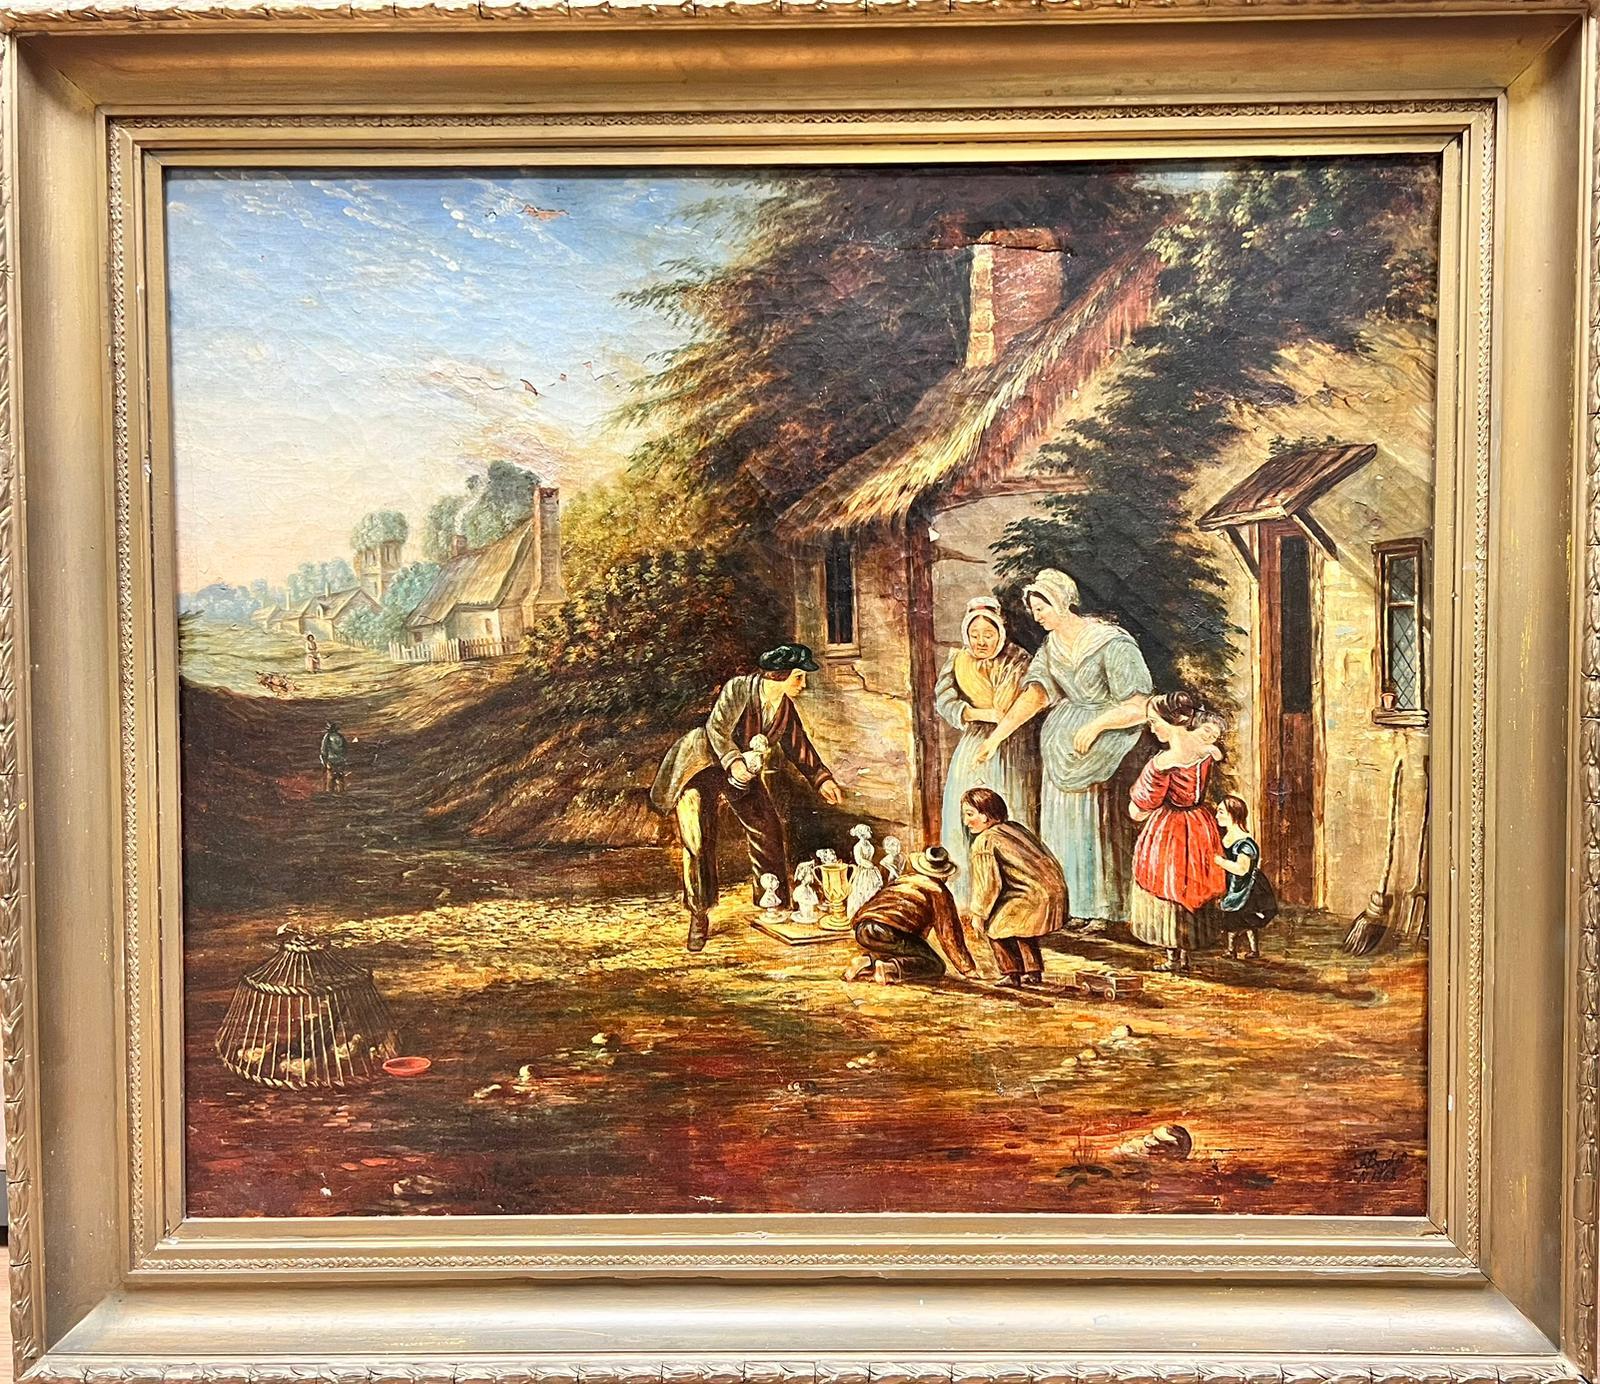 English School 18th/ 19th century
signed oil on canvas, framed
framed: 35 x 40 inches
canvas: 28 x 36 inches
provenance: private collection, England
condition: the painting requires restoration and is offered as such. 
